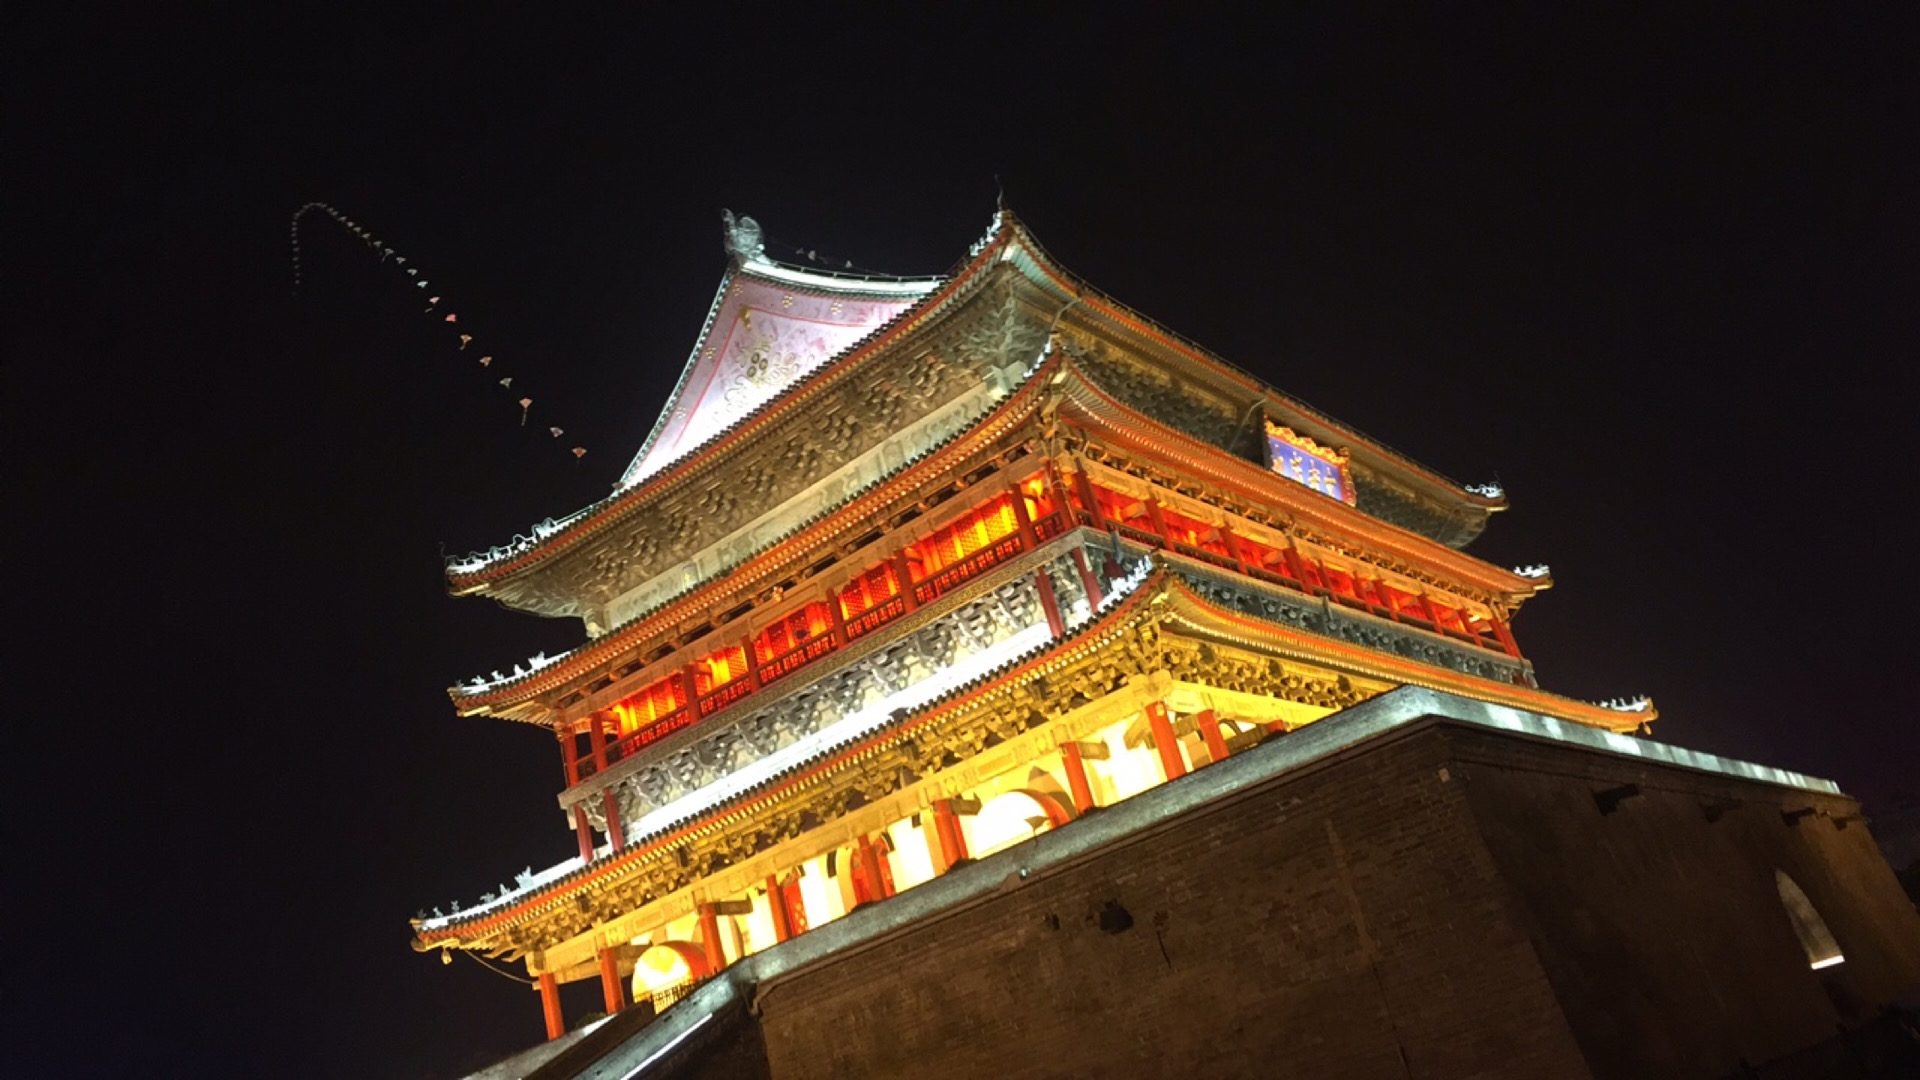 Lighted bell Tower at night in Xi'an, China. Getting lost in Xi'an